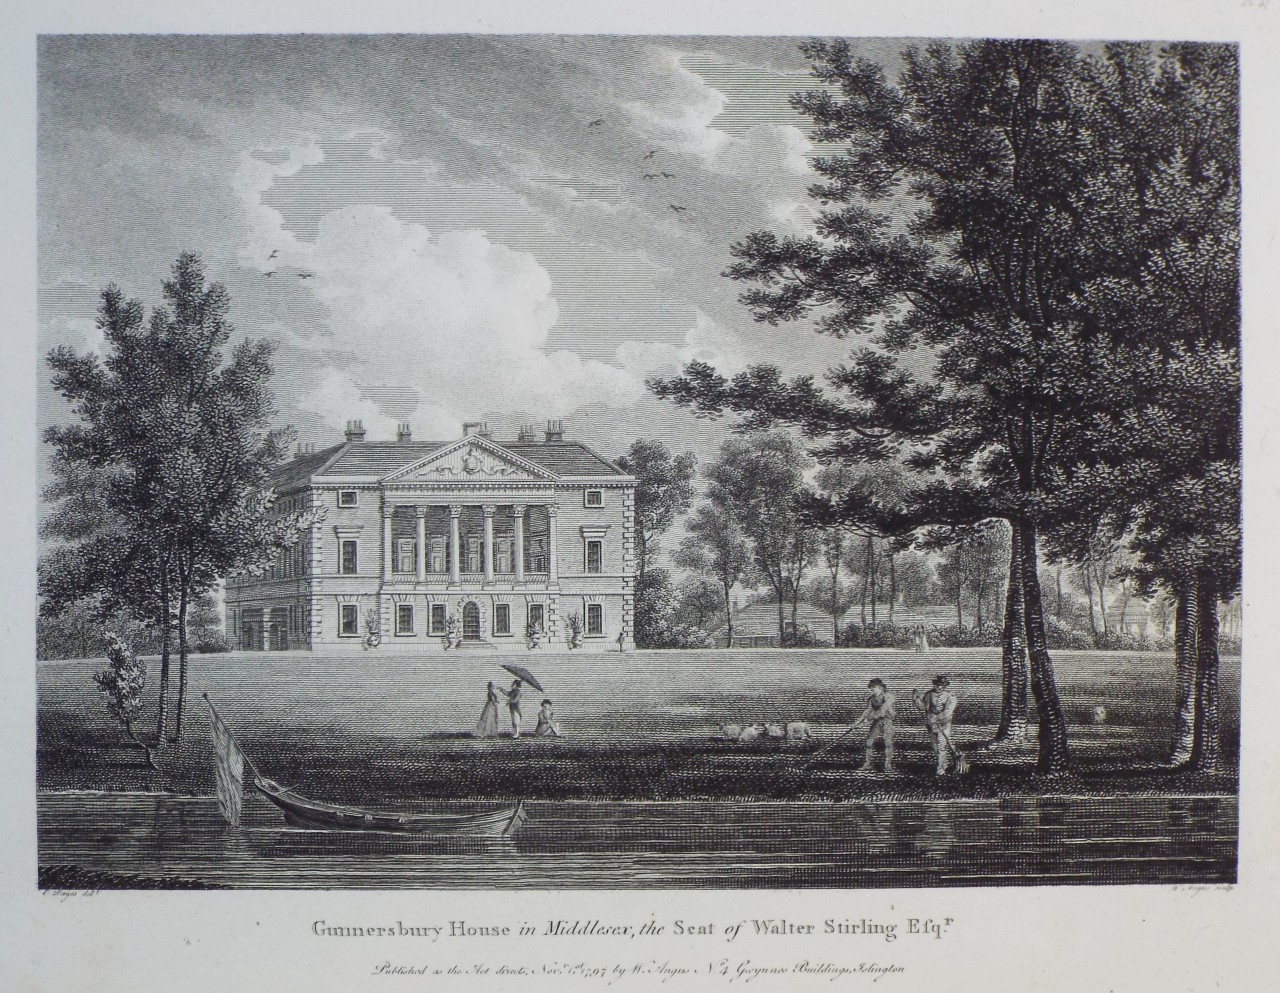 Print - Gunnersbury House in Middlesex, the Seat of Walter Stirling Esqr. - Angus